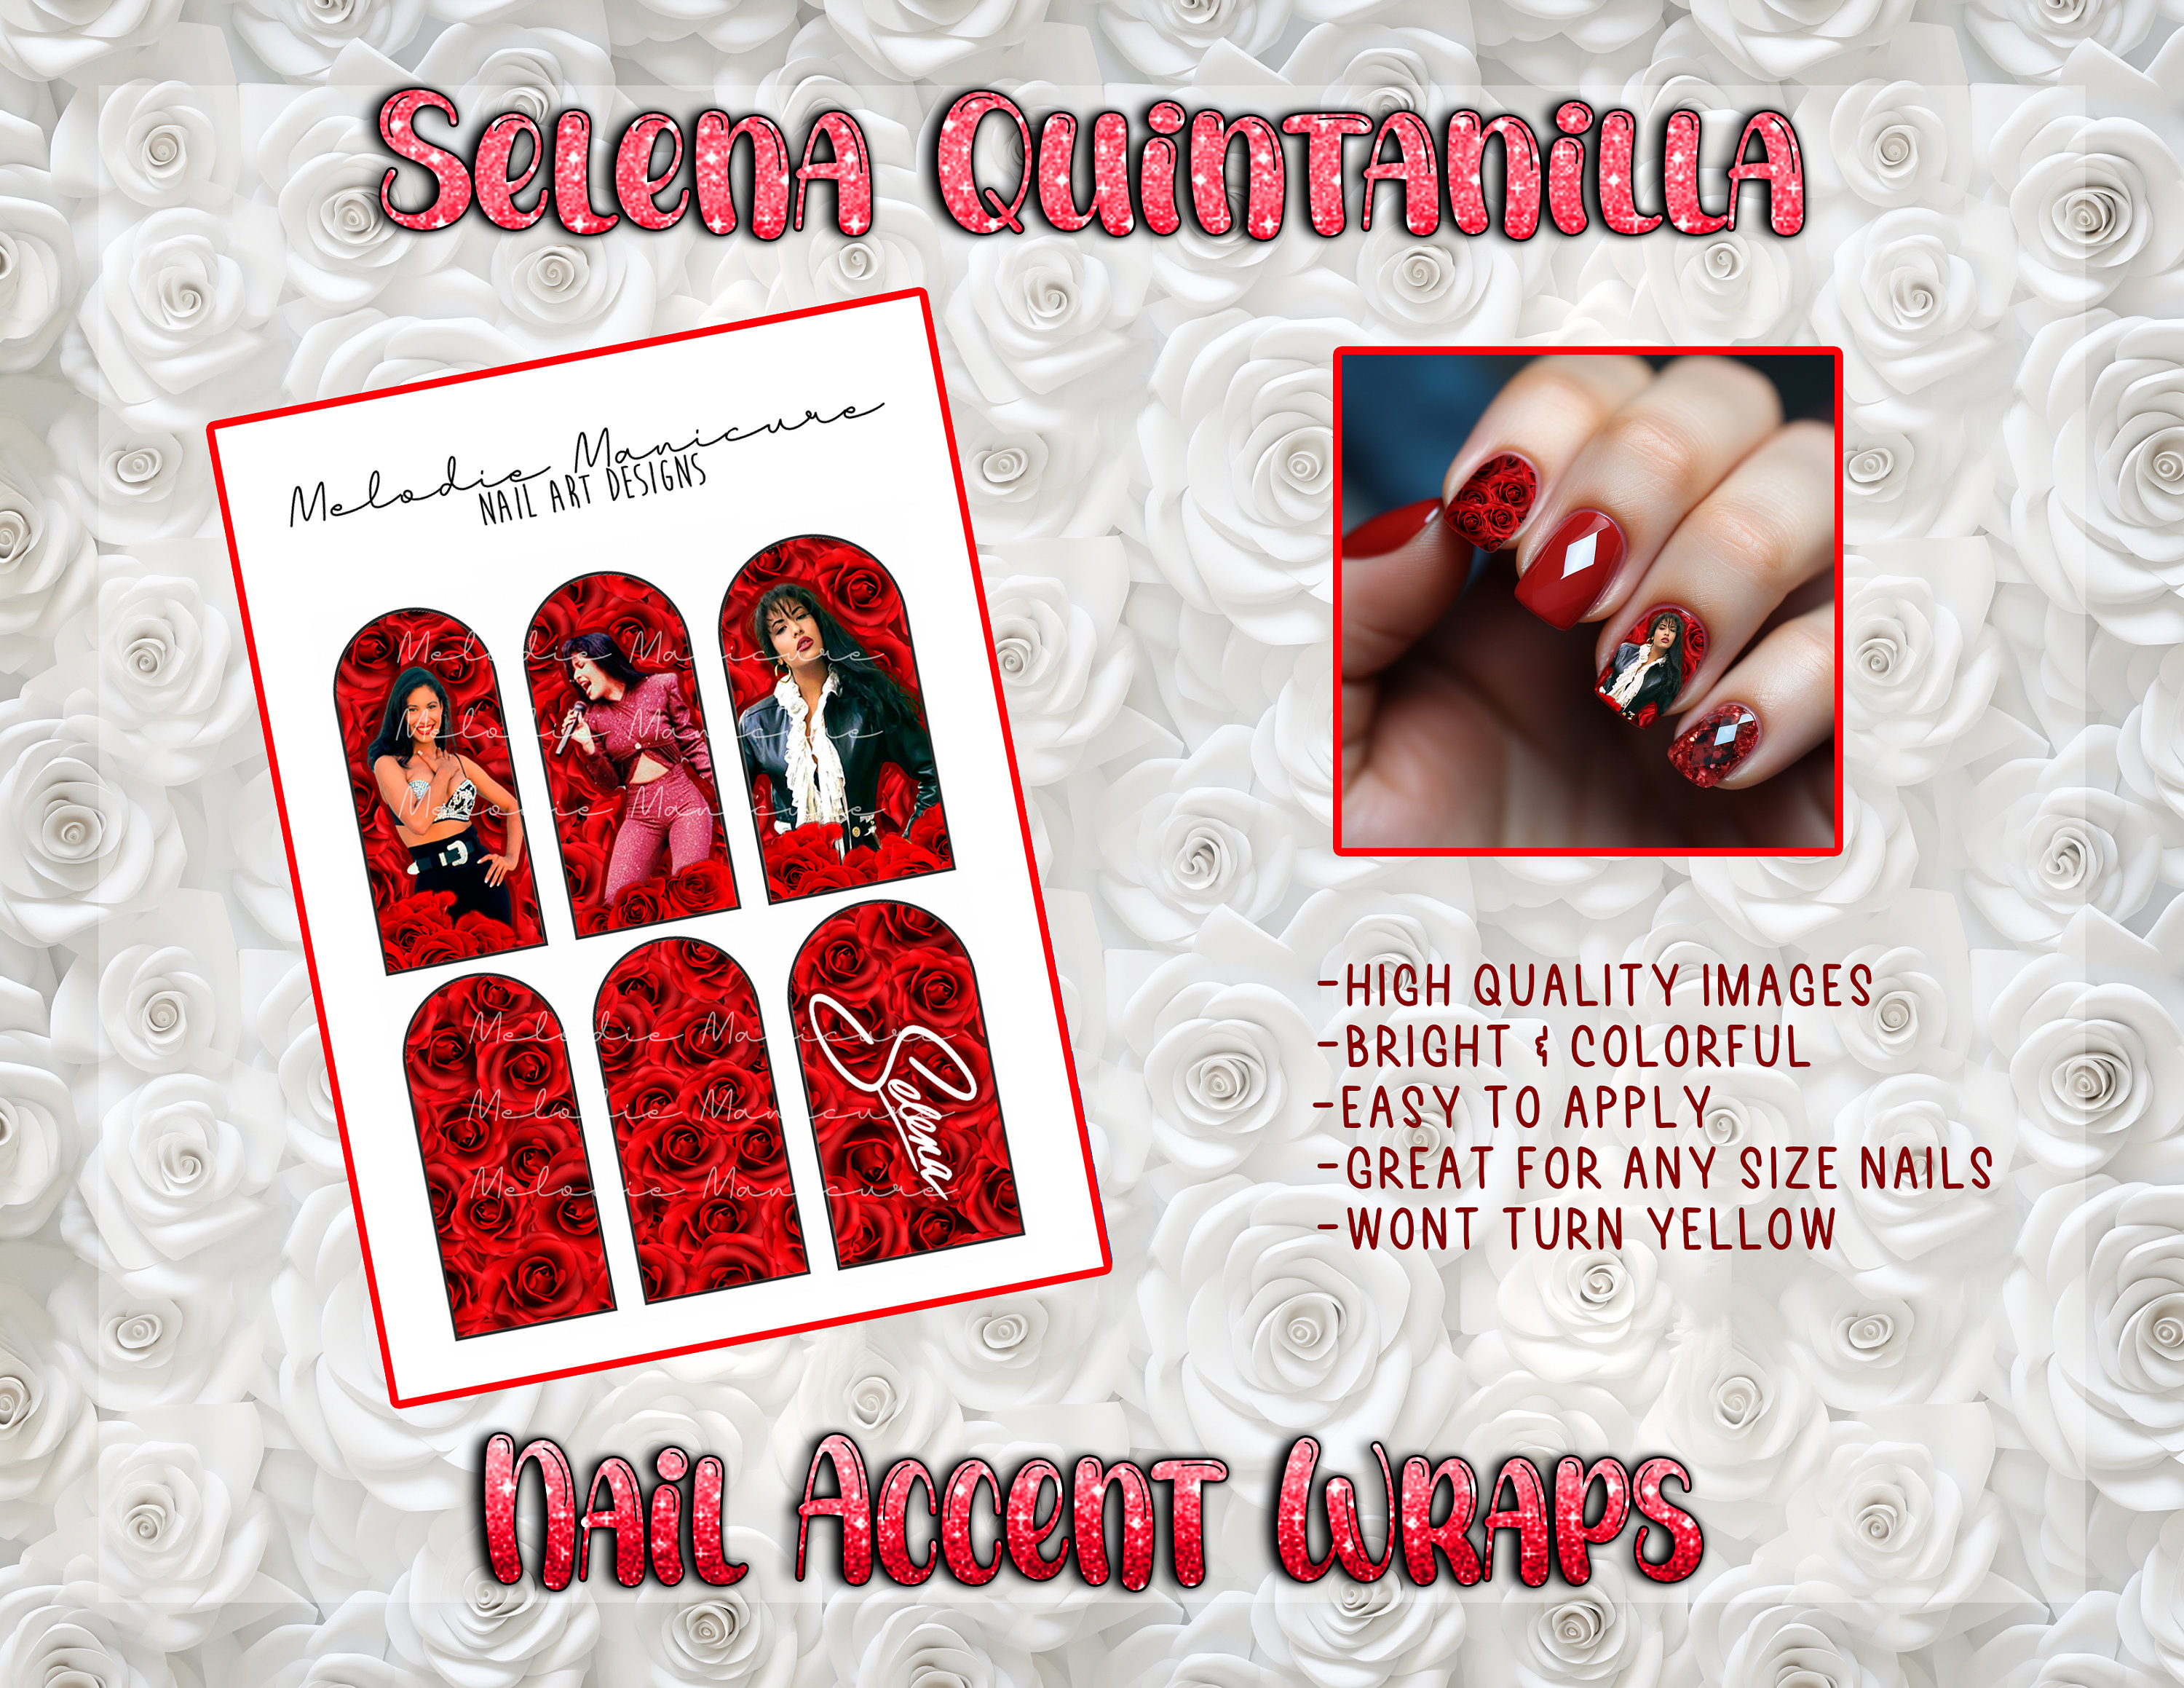 Selena Quintanilla Red & Silver Gems Bralette Inspired Press on Nails 